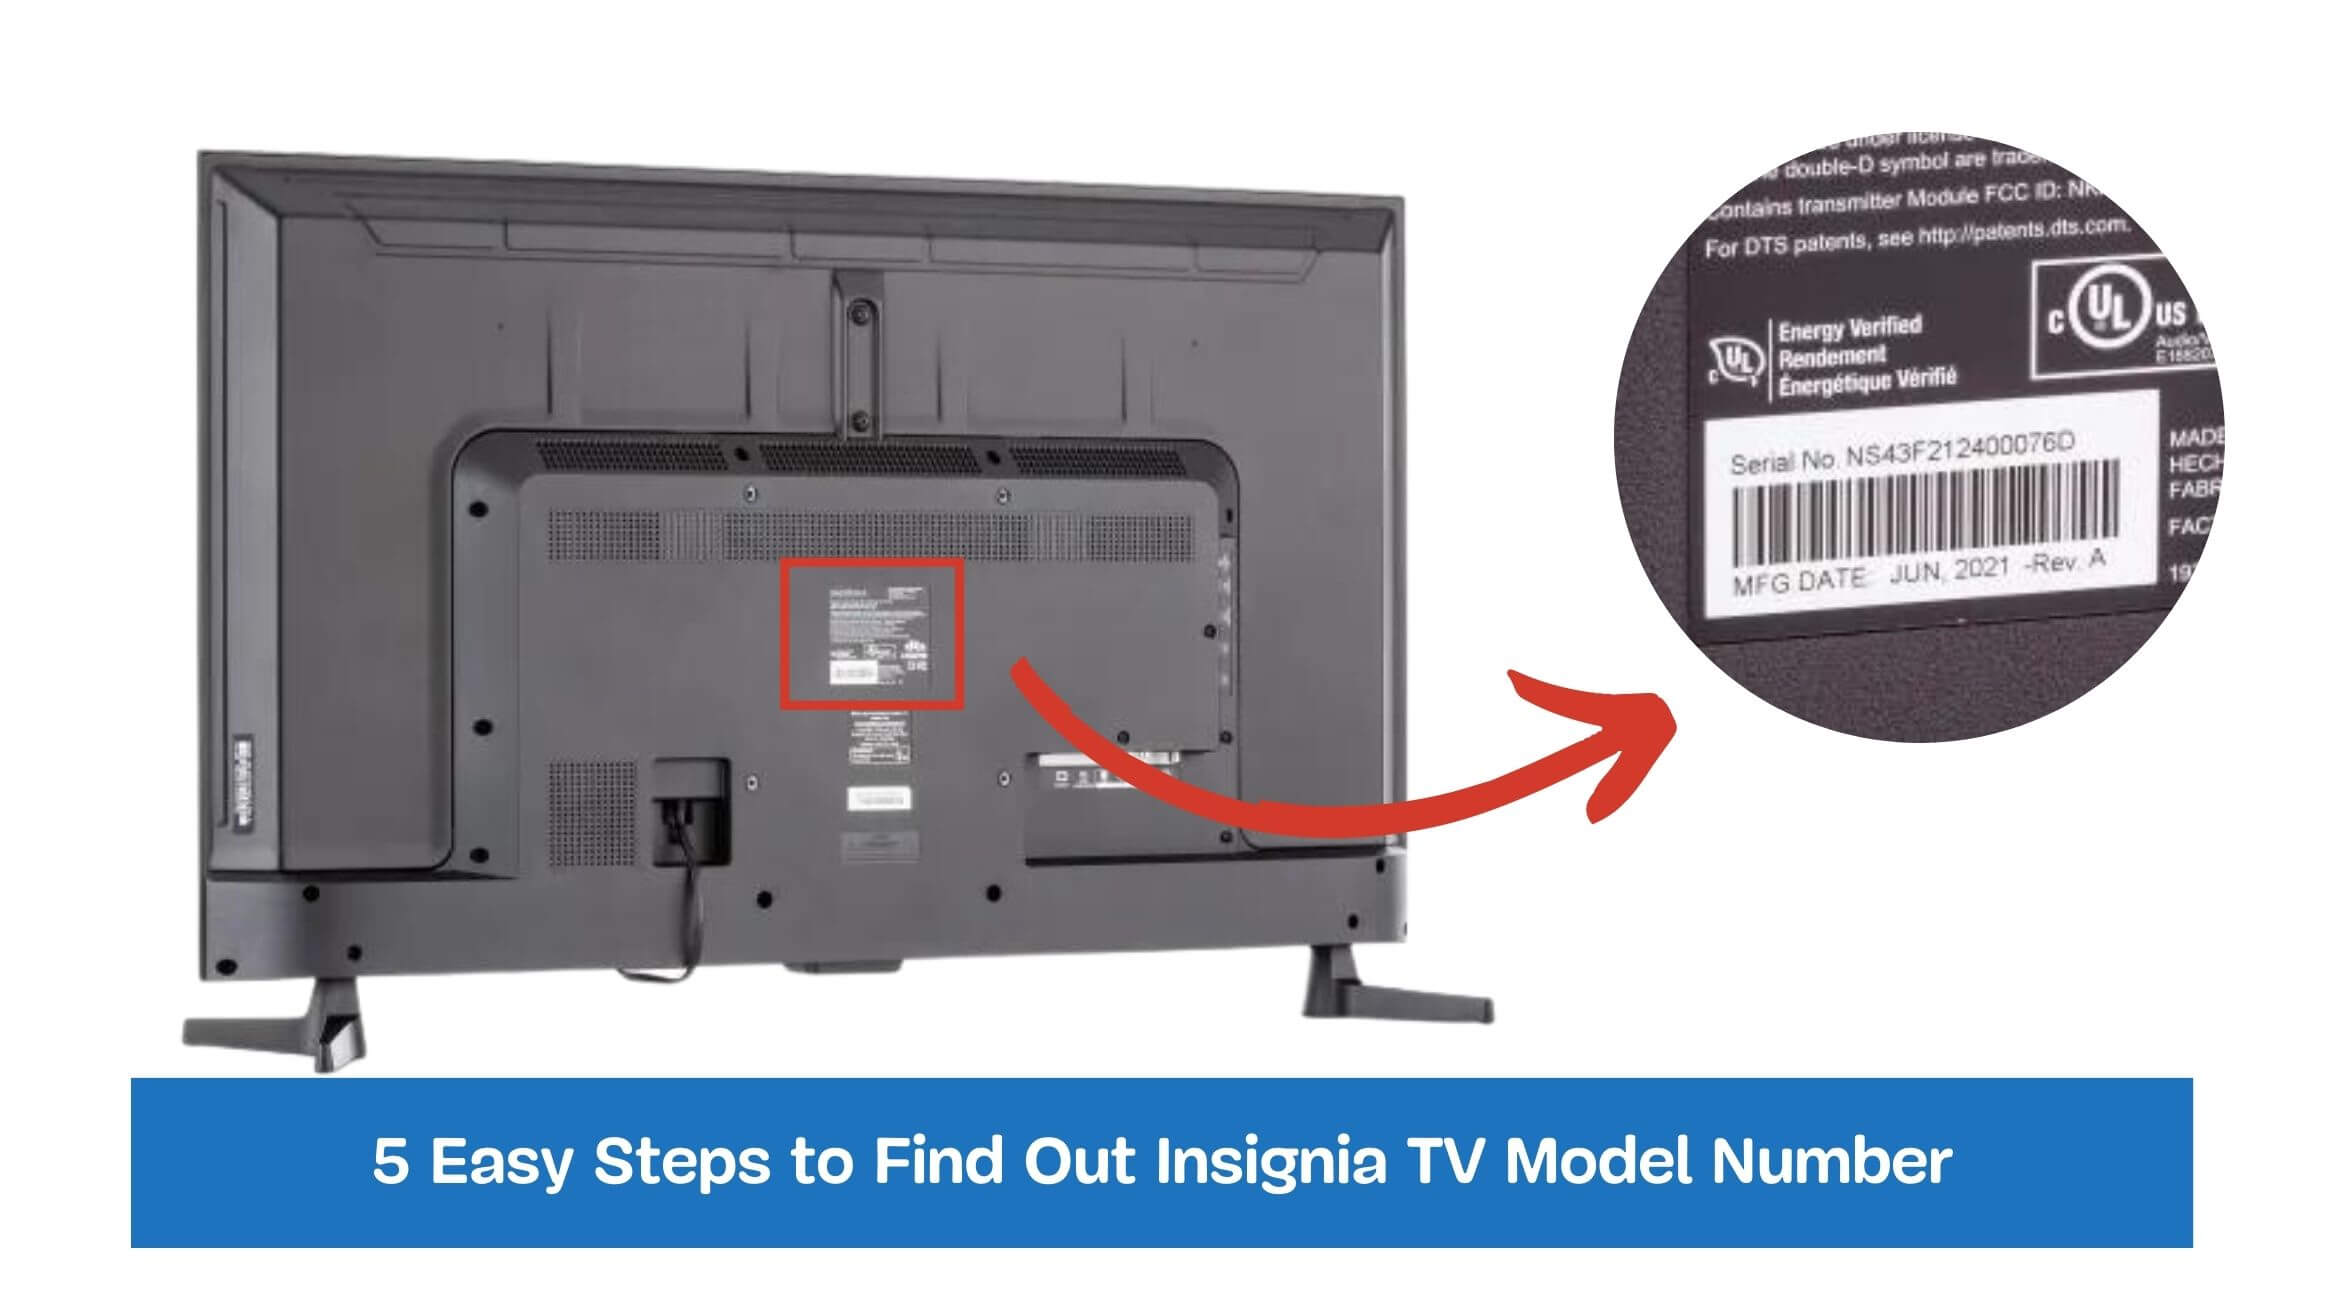 5 Easy Steps to Find Out Insignia TV Model Number